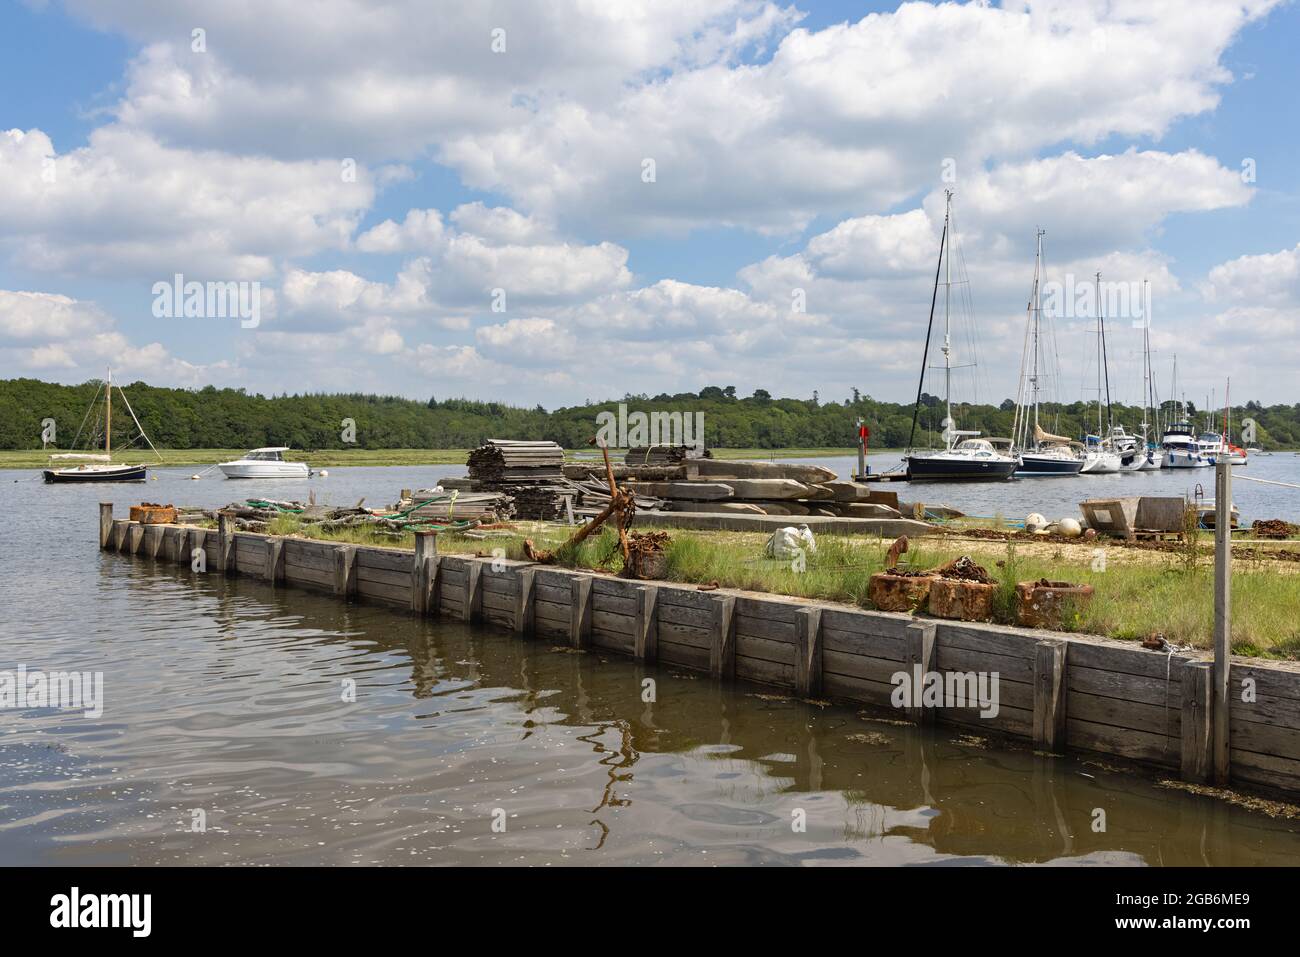 Buckler's Hard, Hampshire, UK, June 23rd 2021: A rusty anchor and chains on a wooden quayside juts into the Beaulieu River on which yachts are moored. Stock Photo